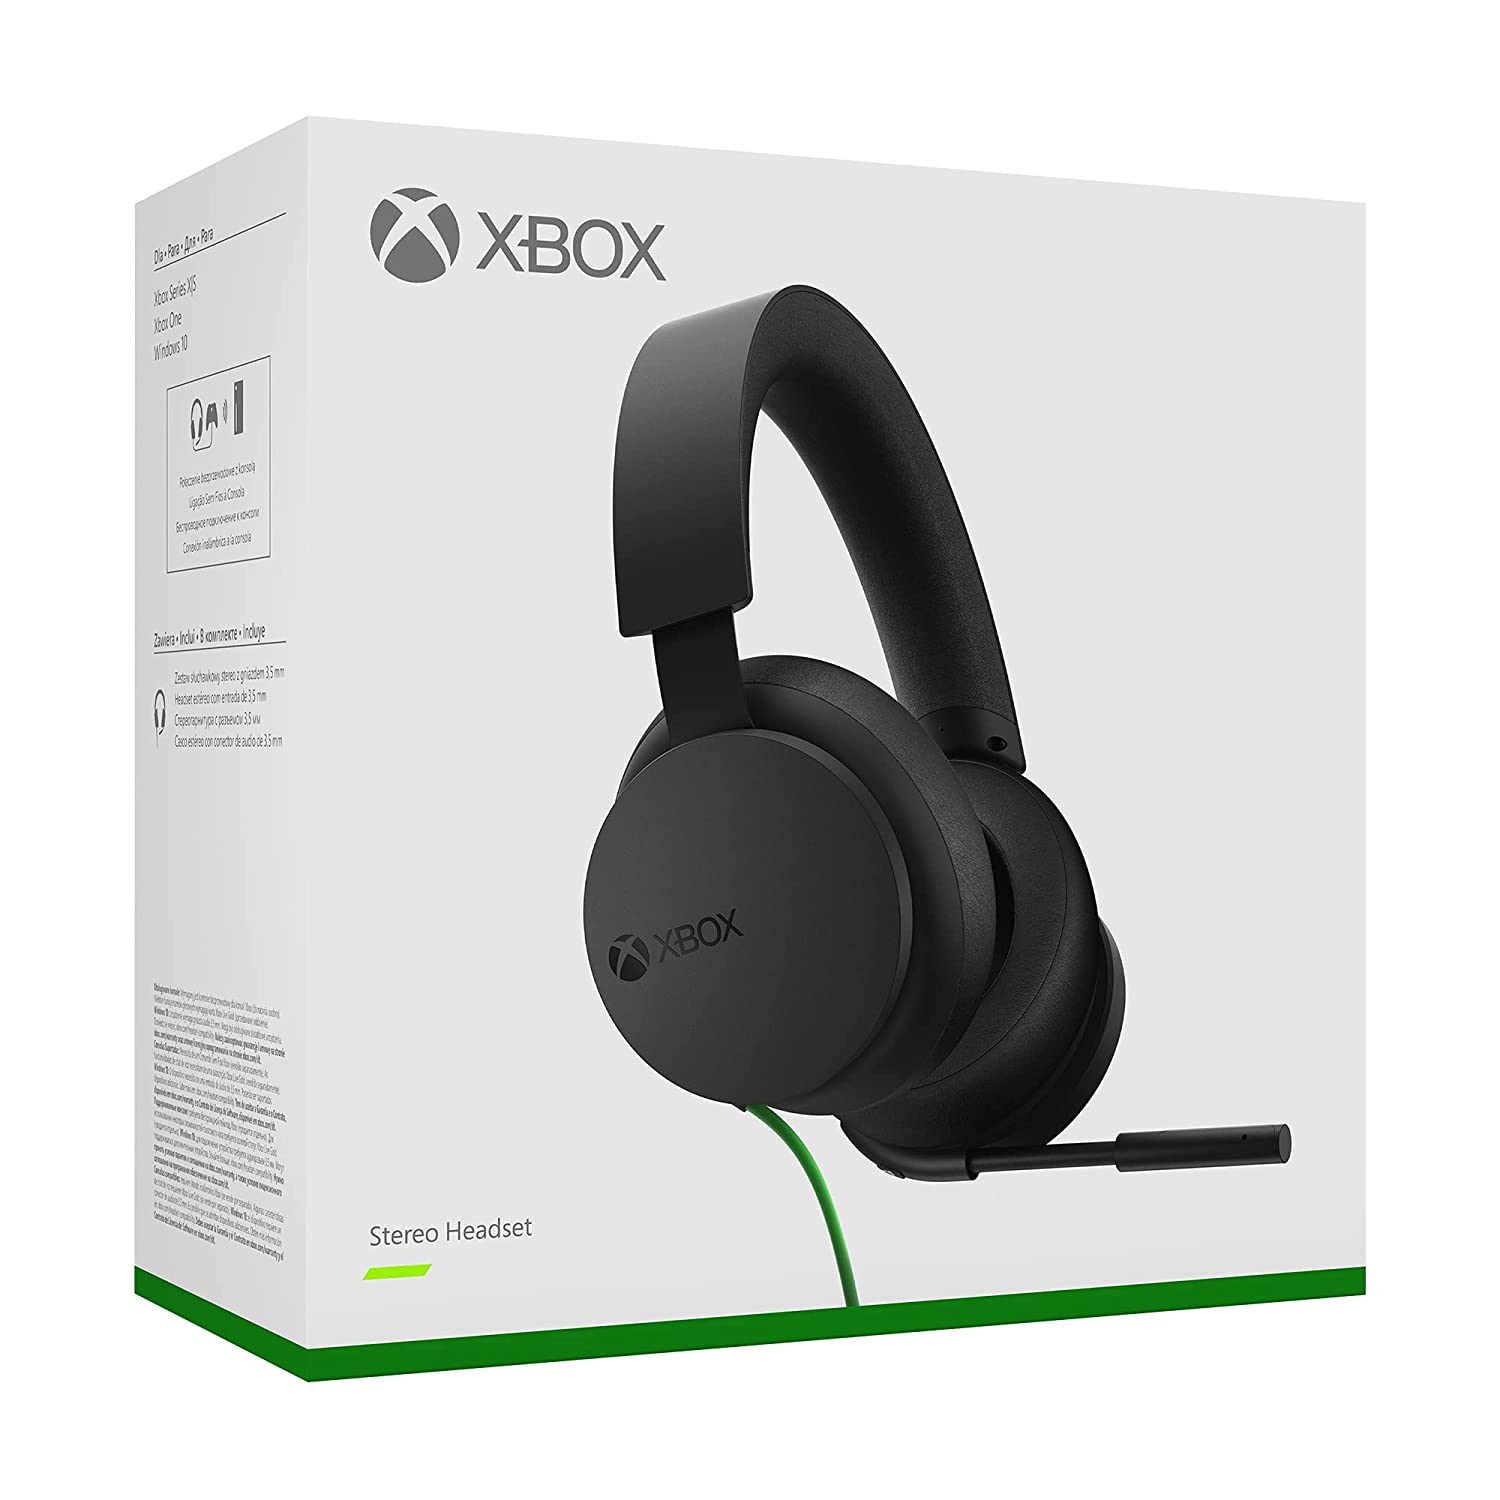 Xbox Stereo Headset for Xbox Series X|S, Xbox One, and Windows 10 Devices - Pro-Distributing